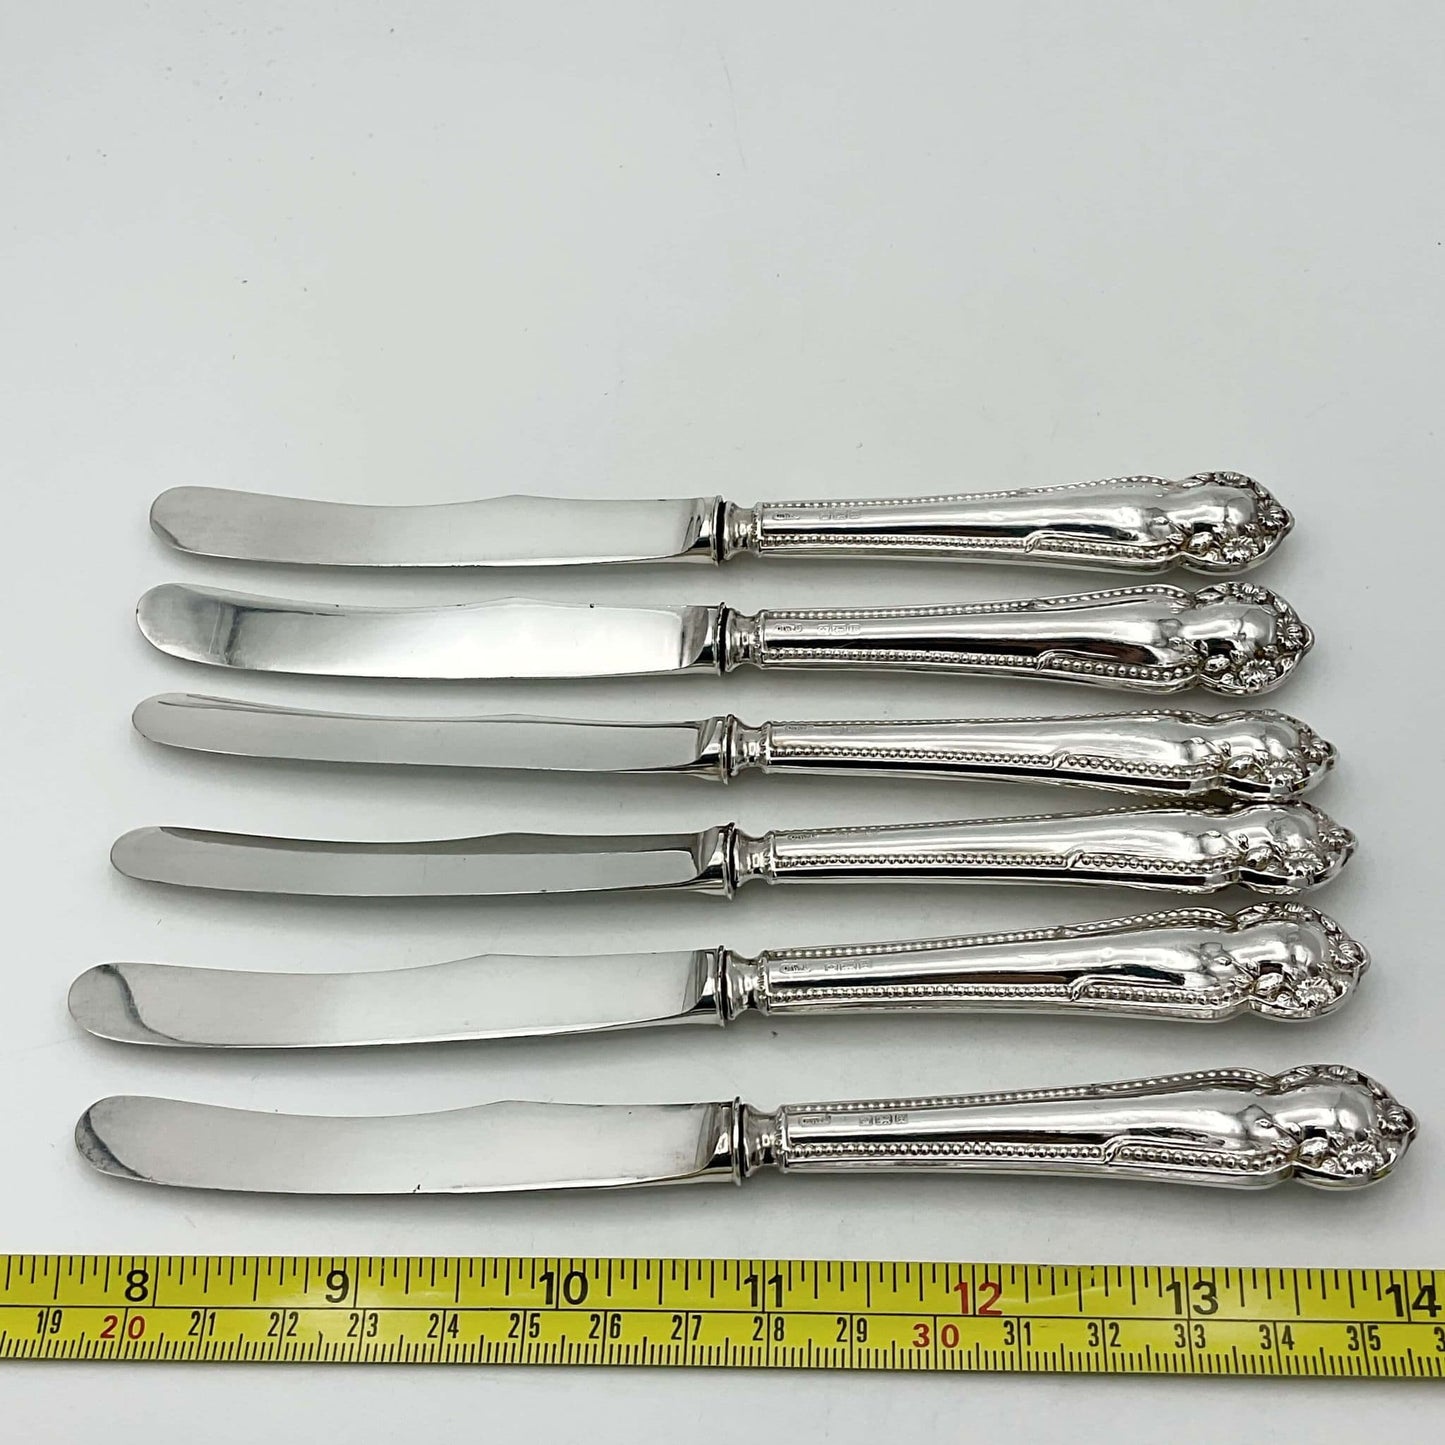 Set of six side knives next to a tape measure 